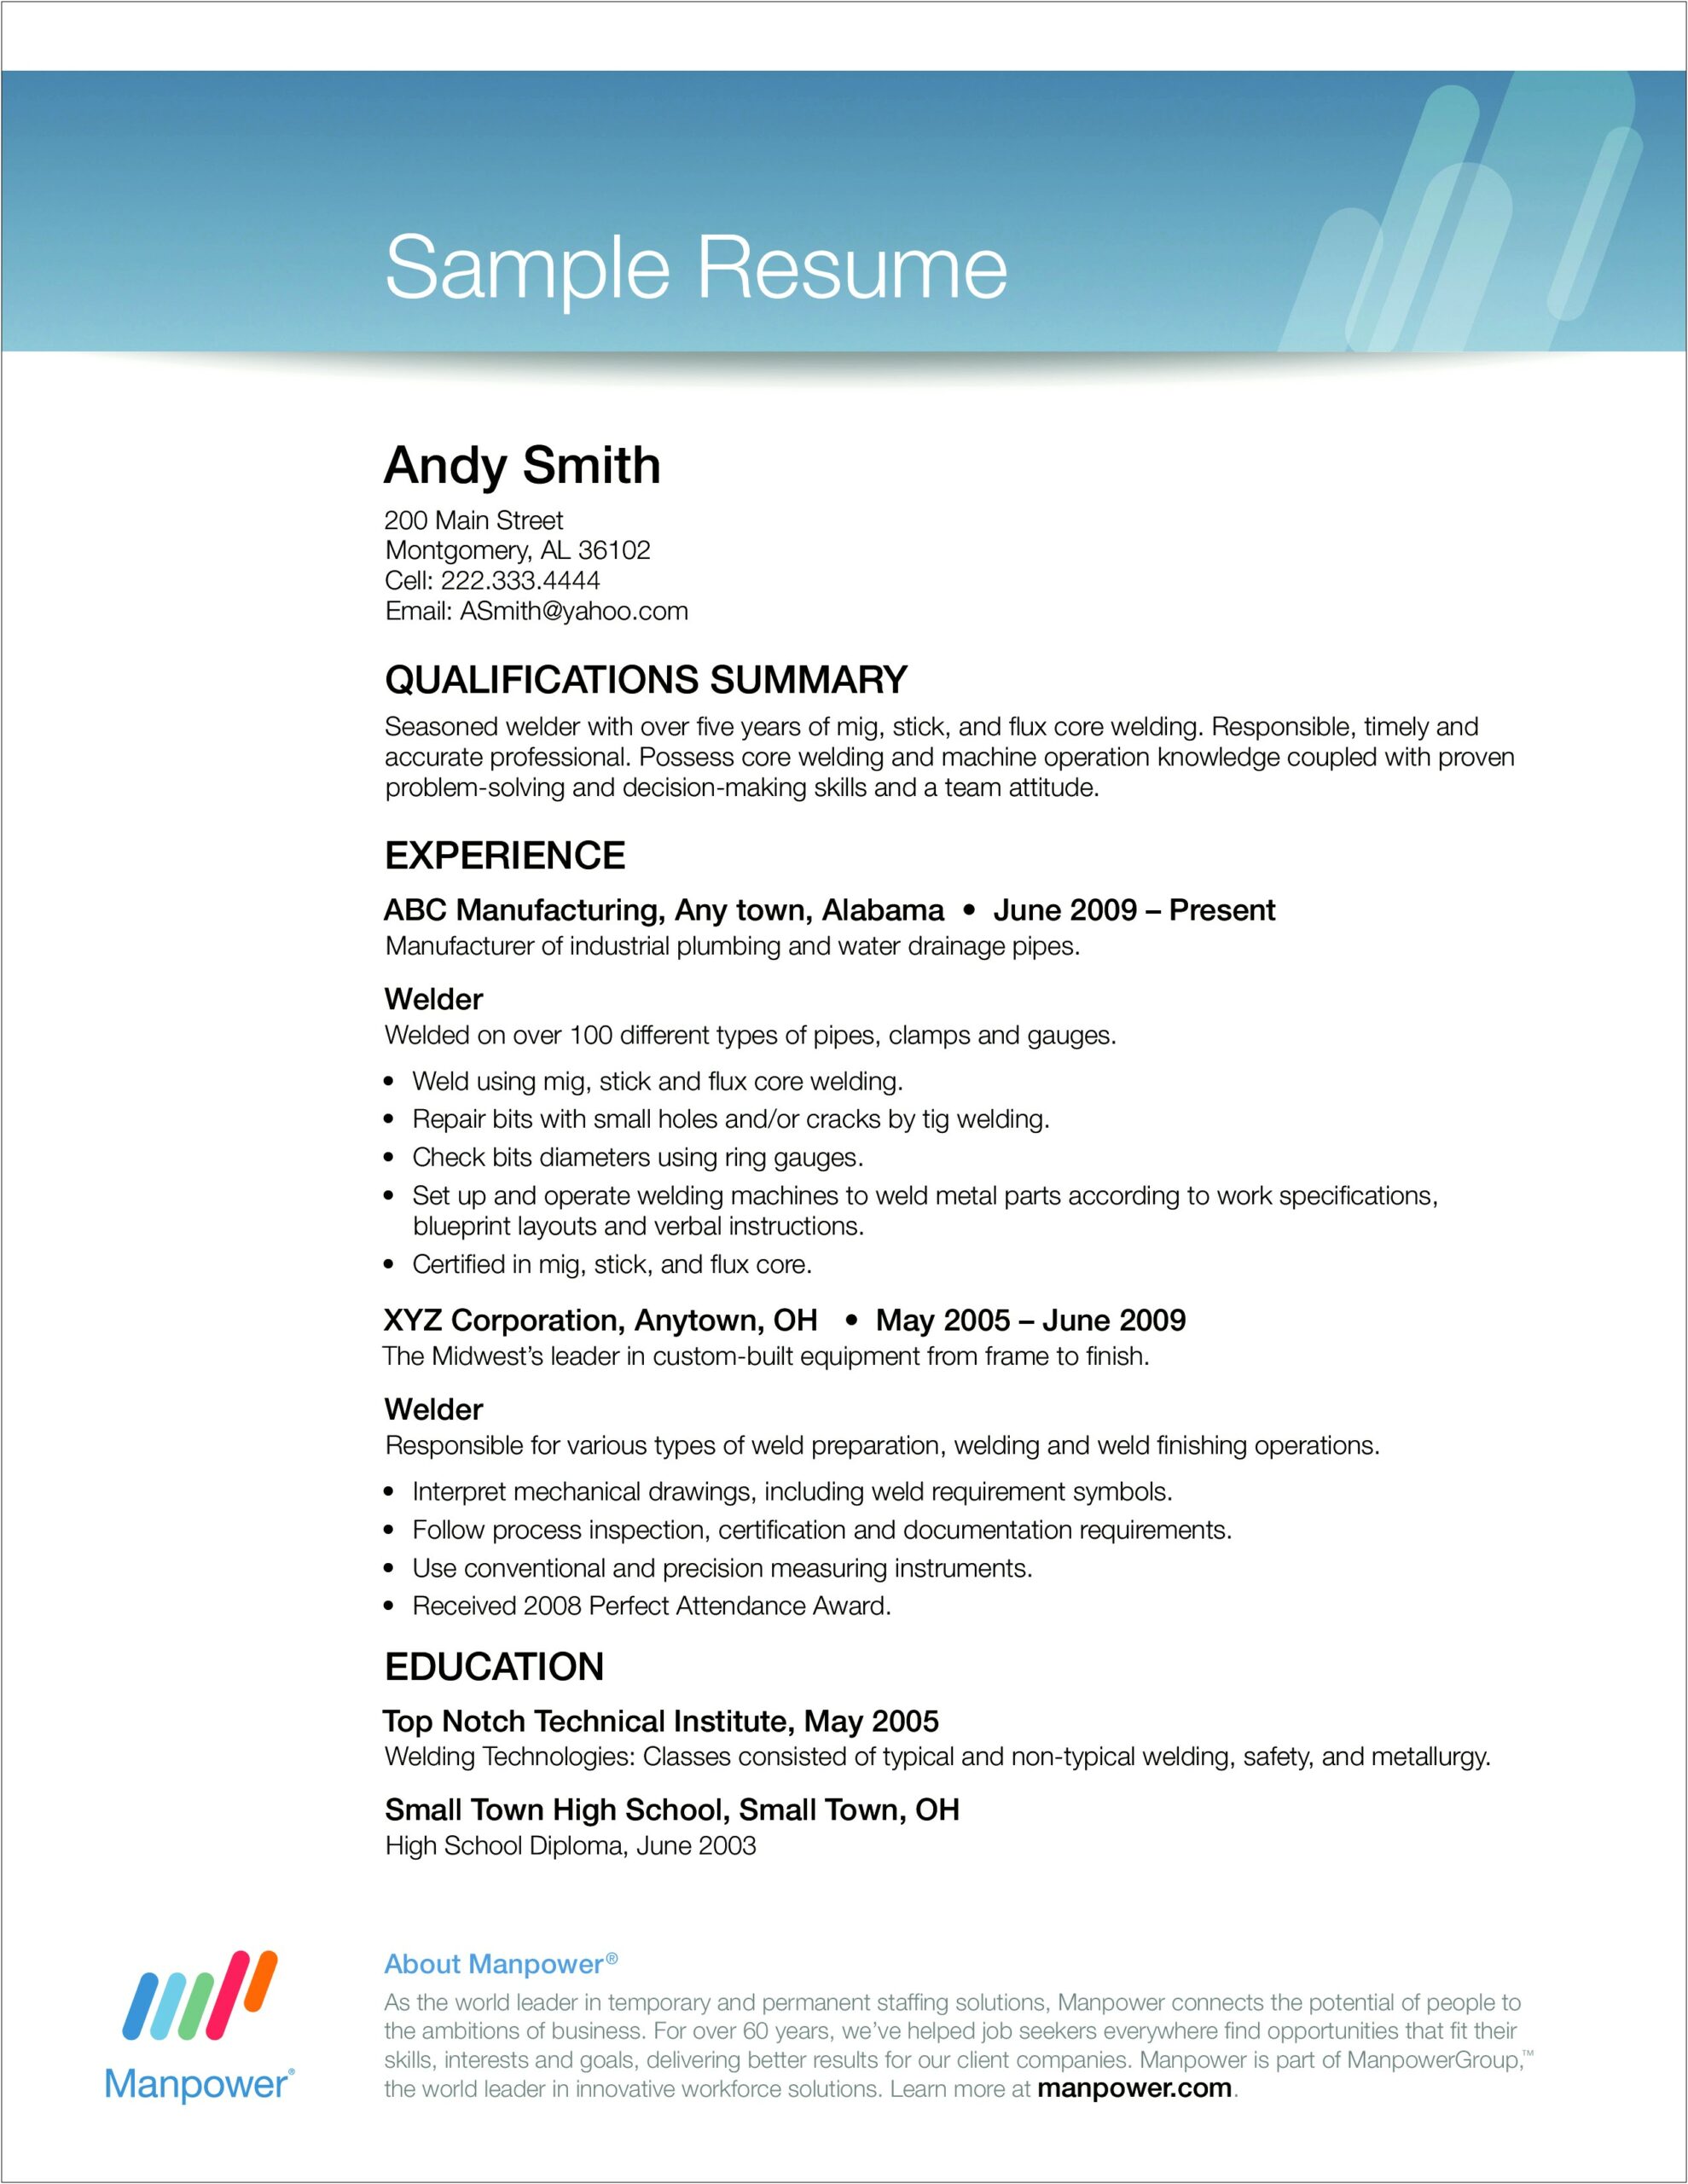 Professional Resume Summary Copy And Paste